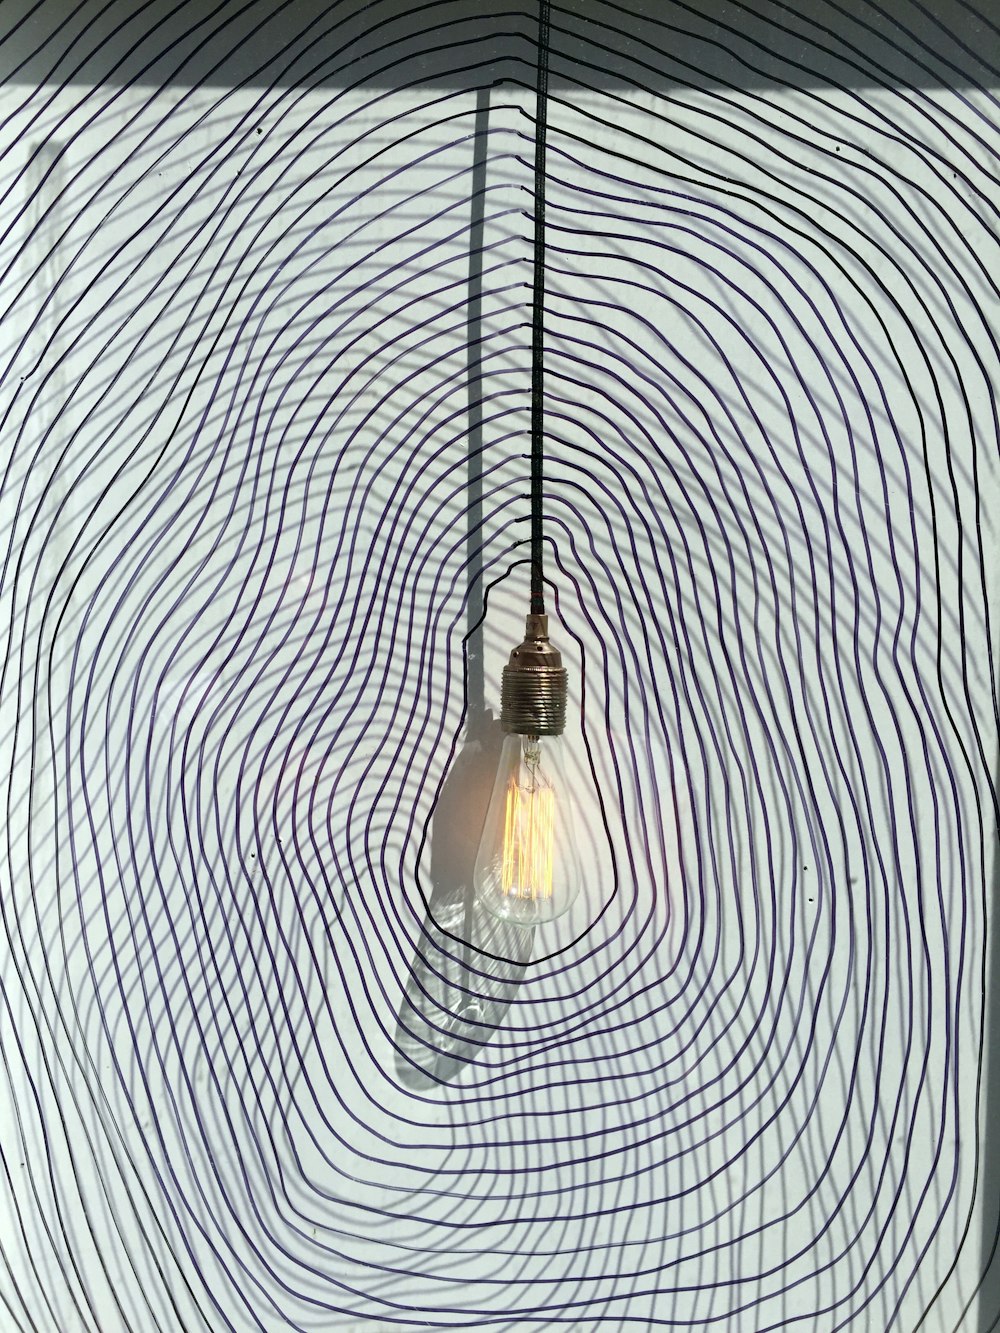 clear glass pendant lamp turned off